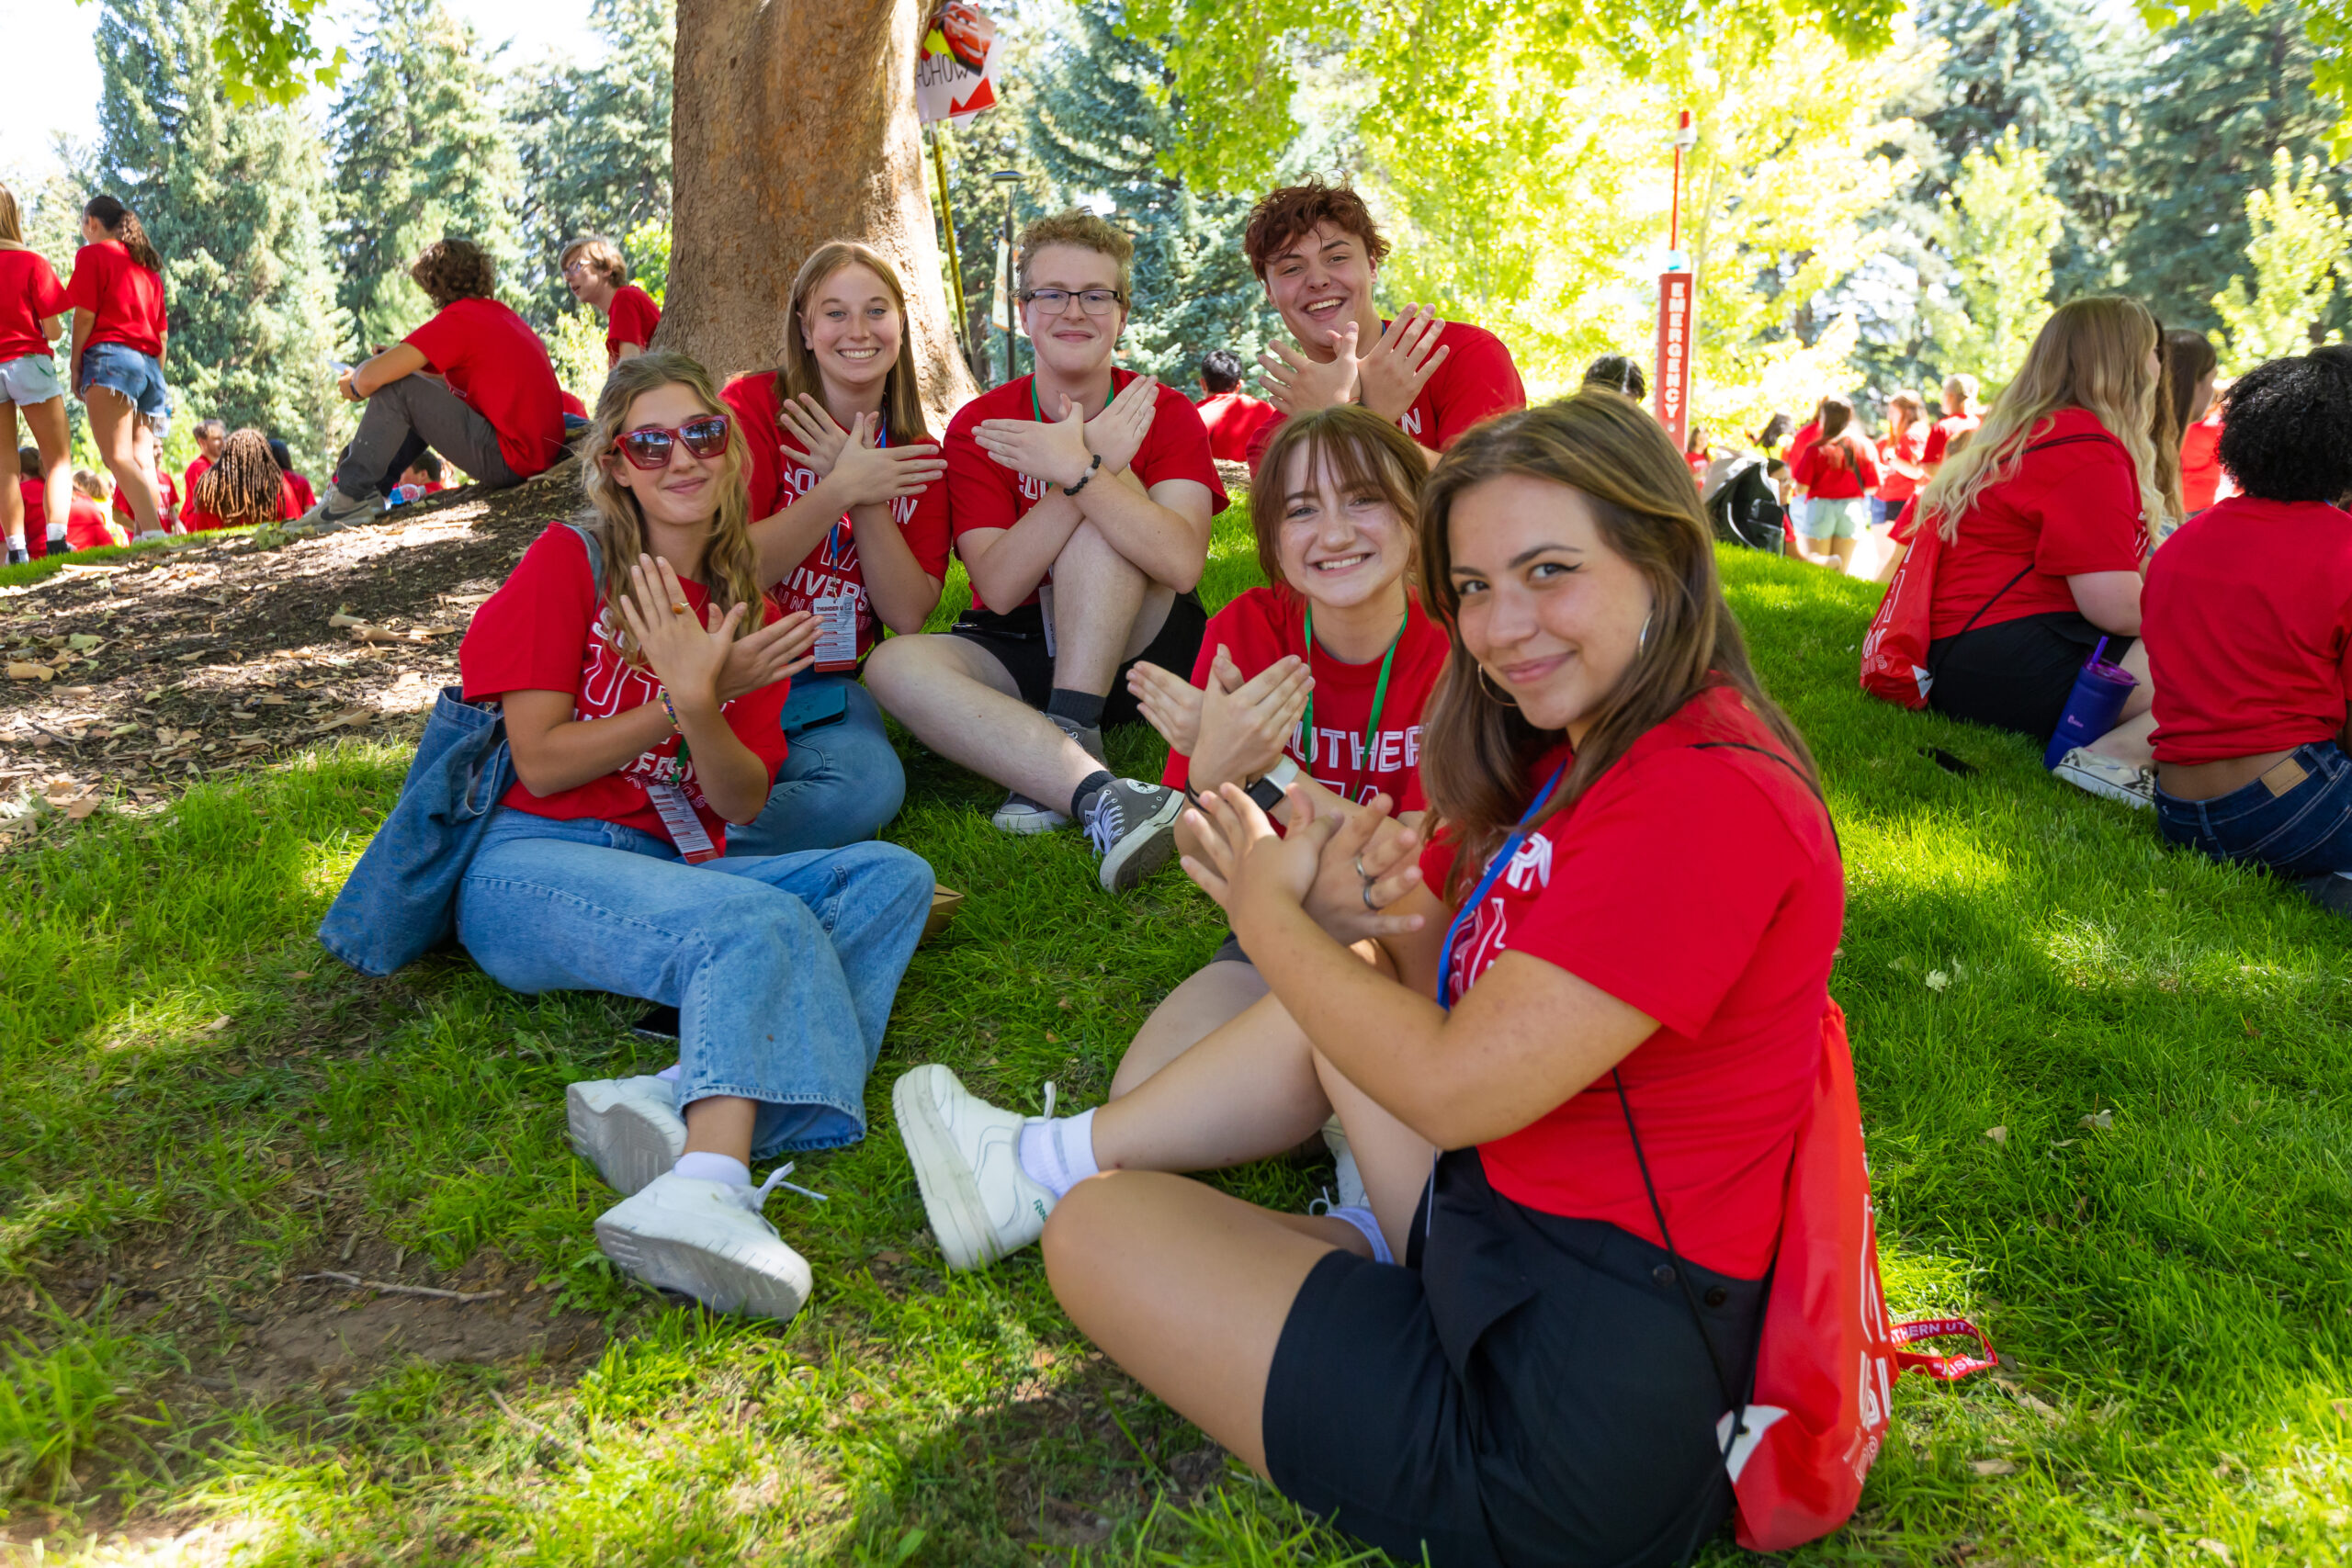 The Larry H. & Gail Miller Family Foundation announces a $850,000 challenge grant to significantly increase mental health resources for Southern Utah University students.